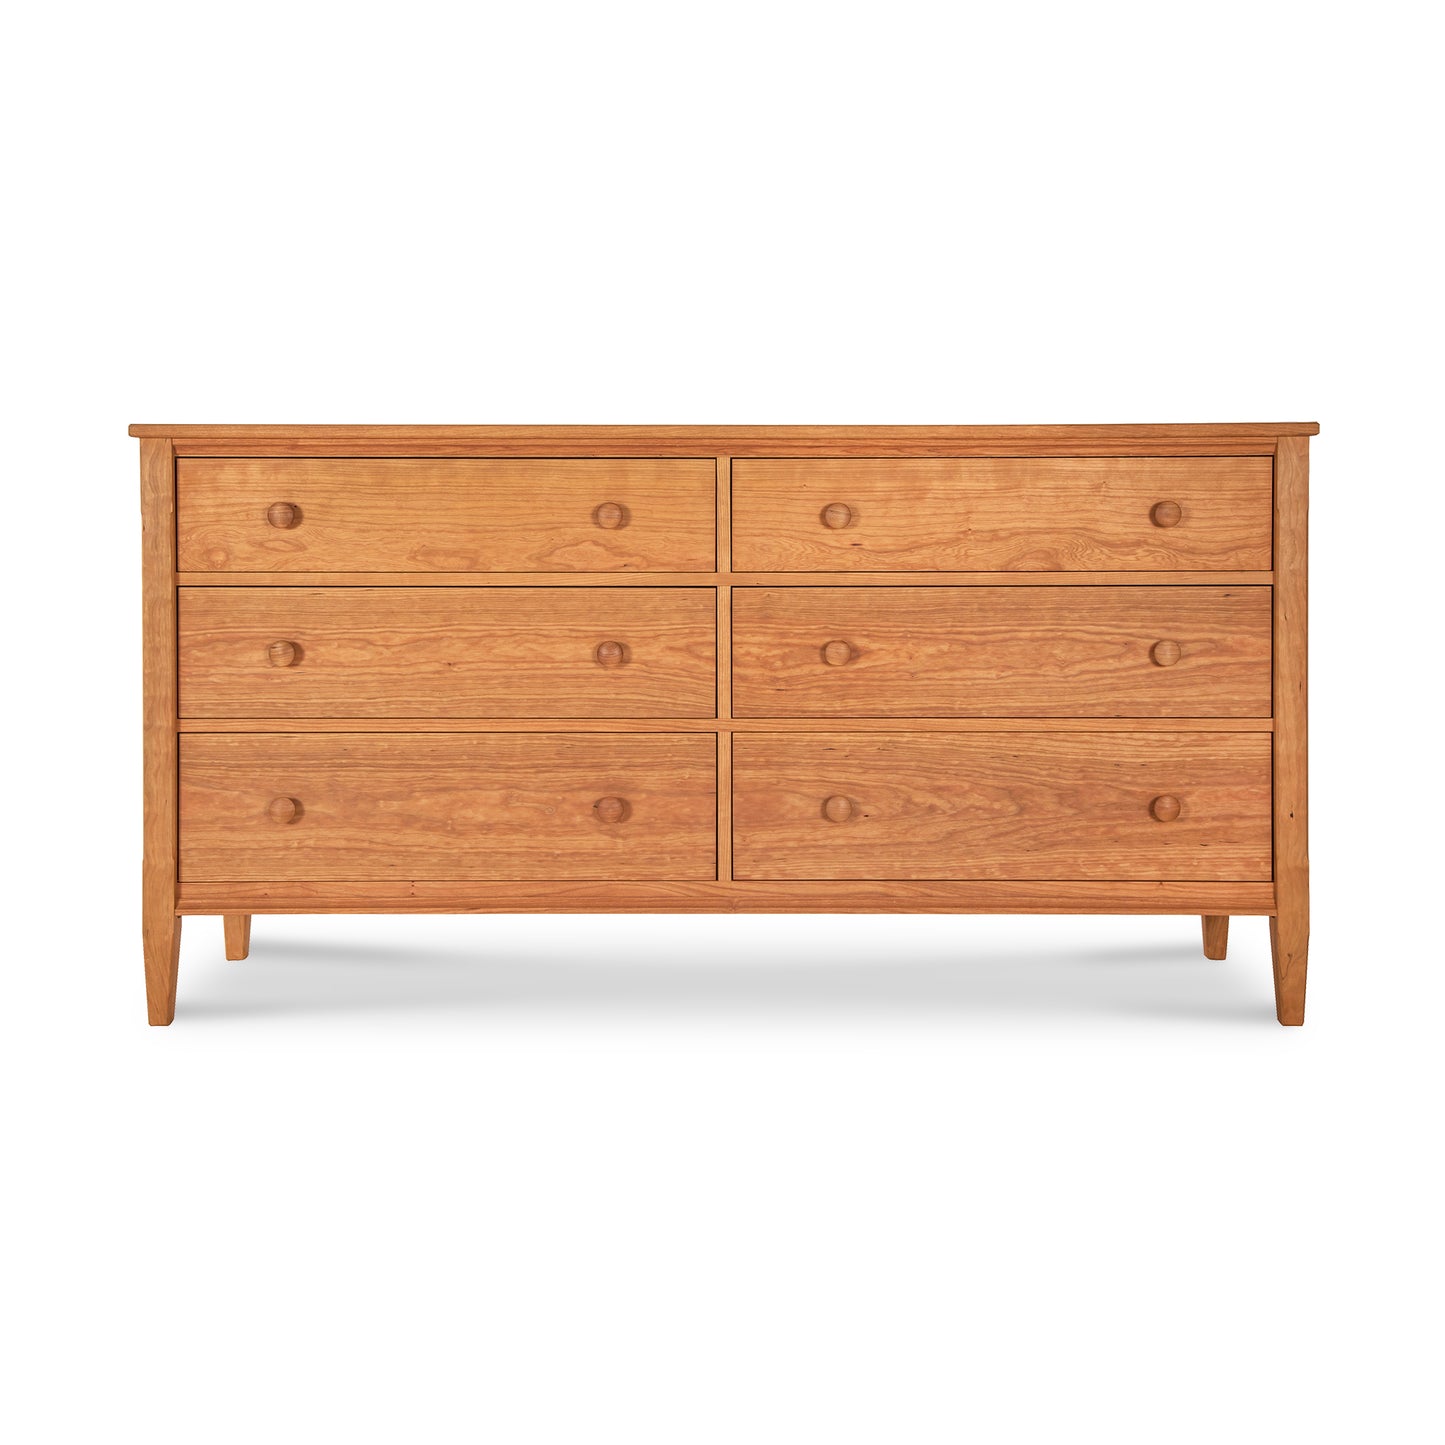 A Maple Corner Woodworks Vermont Shaker 6-Drawer Dresser with six drawers, arranged in two columns of three, featuring round knobs and slightly tapered legs, against a plain white background.